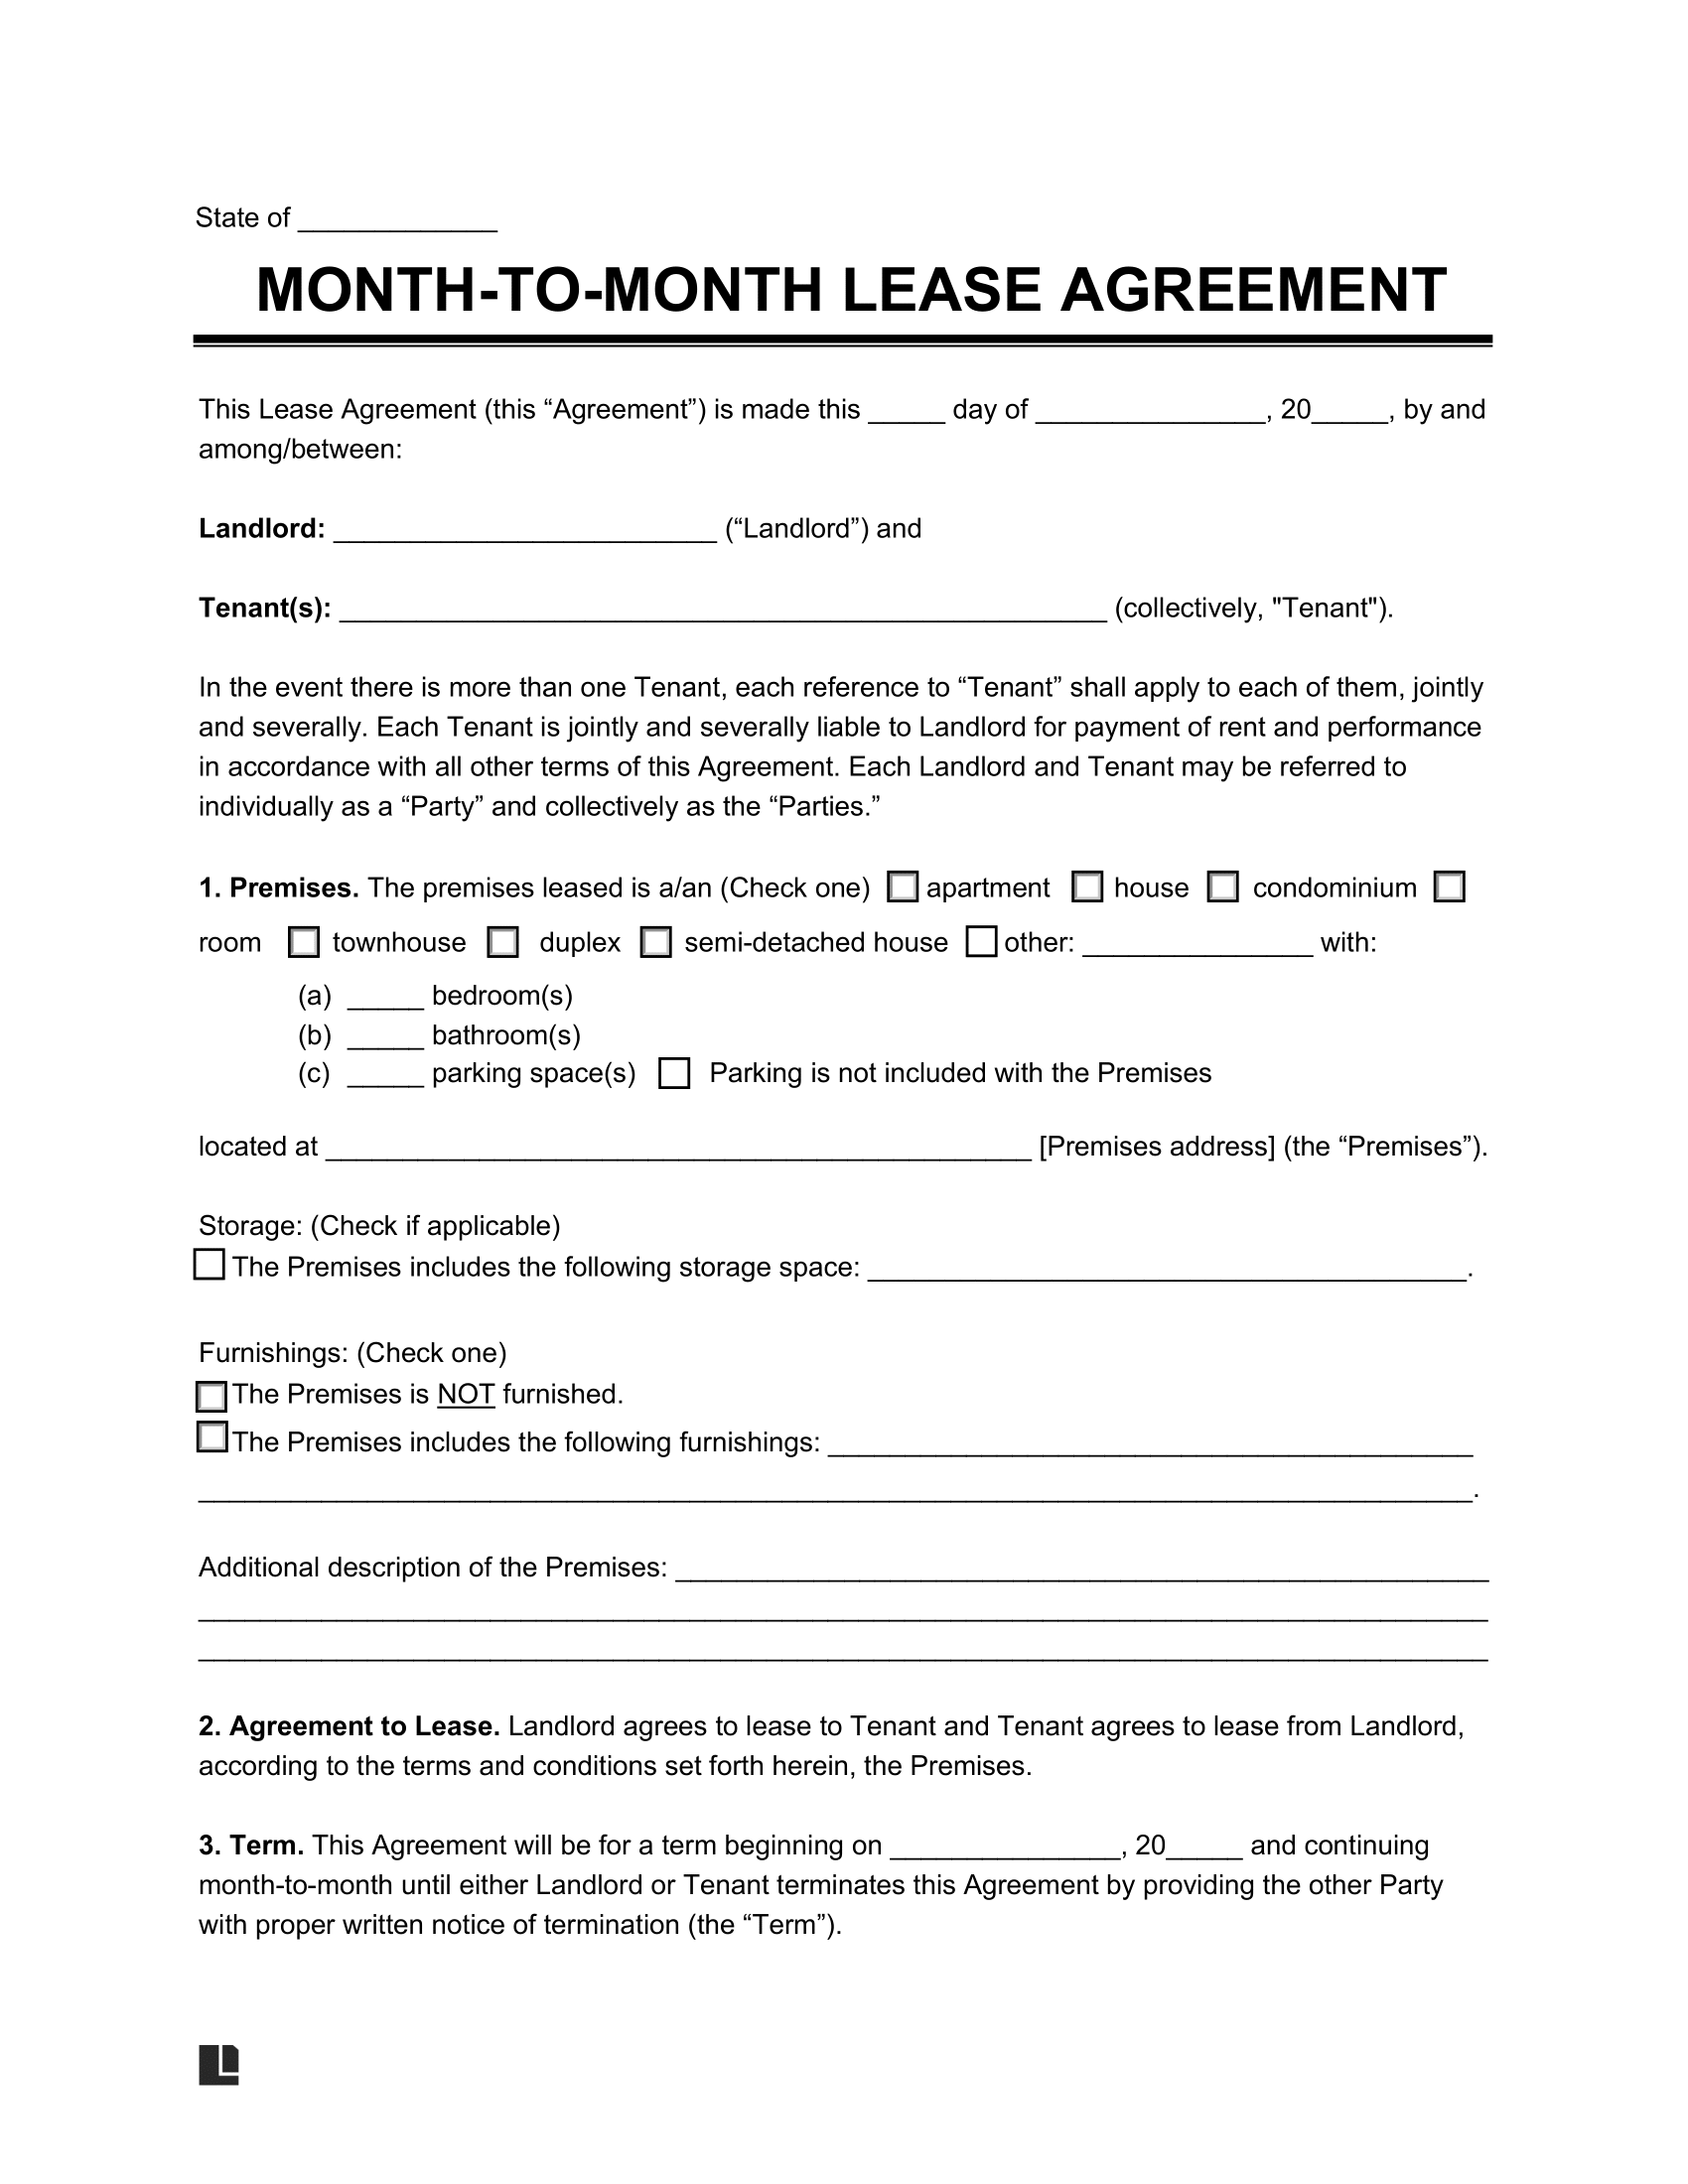 Fill In The Blank Lease